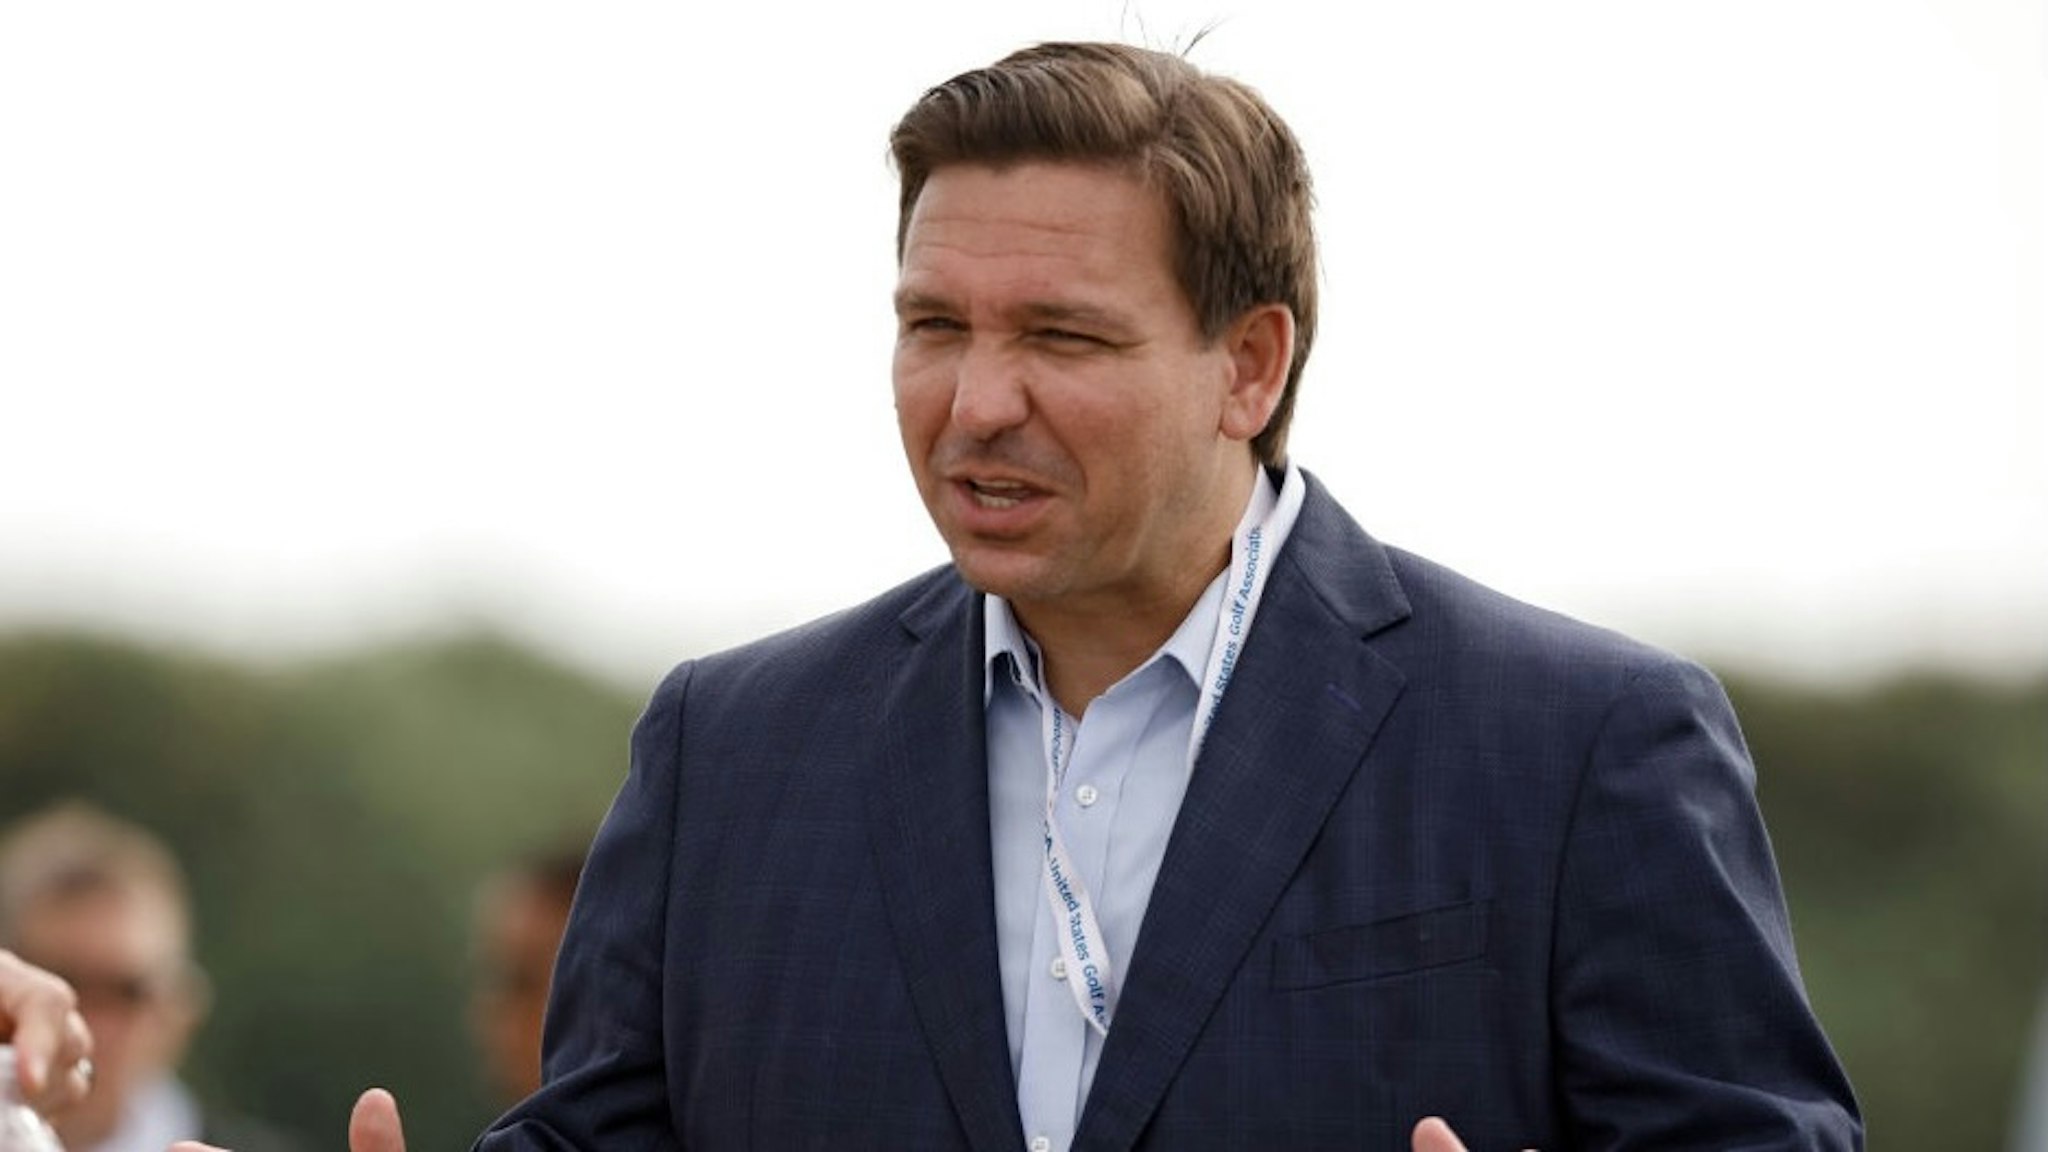 The Walker Cup - Day 1 JUNO BEACH, FLORIDA - MAY 08: Florida governor Ron DeSantis meets with fans during Day One of The Walker Cup at Seminole Golf Club on May 08, 2021 in Juno Beach, Florida. (Photo by Cliff Hawkins/Getty Images) Cliff Hawkins / Staff via Getty Images